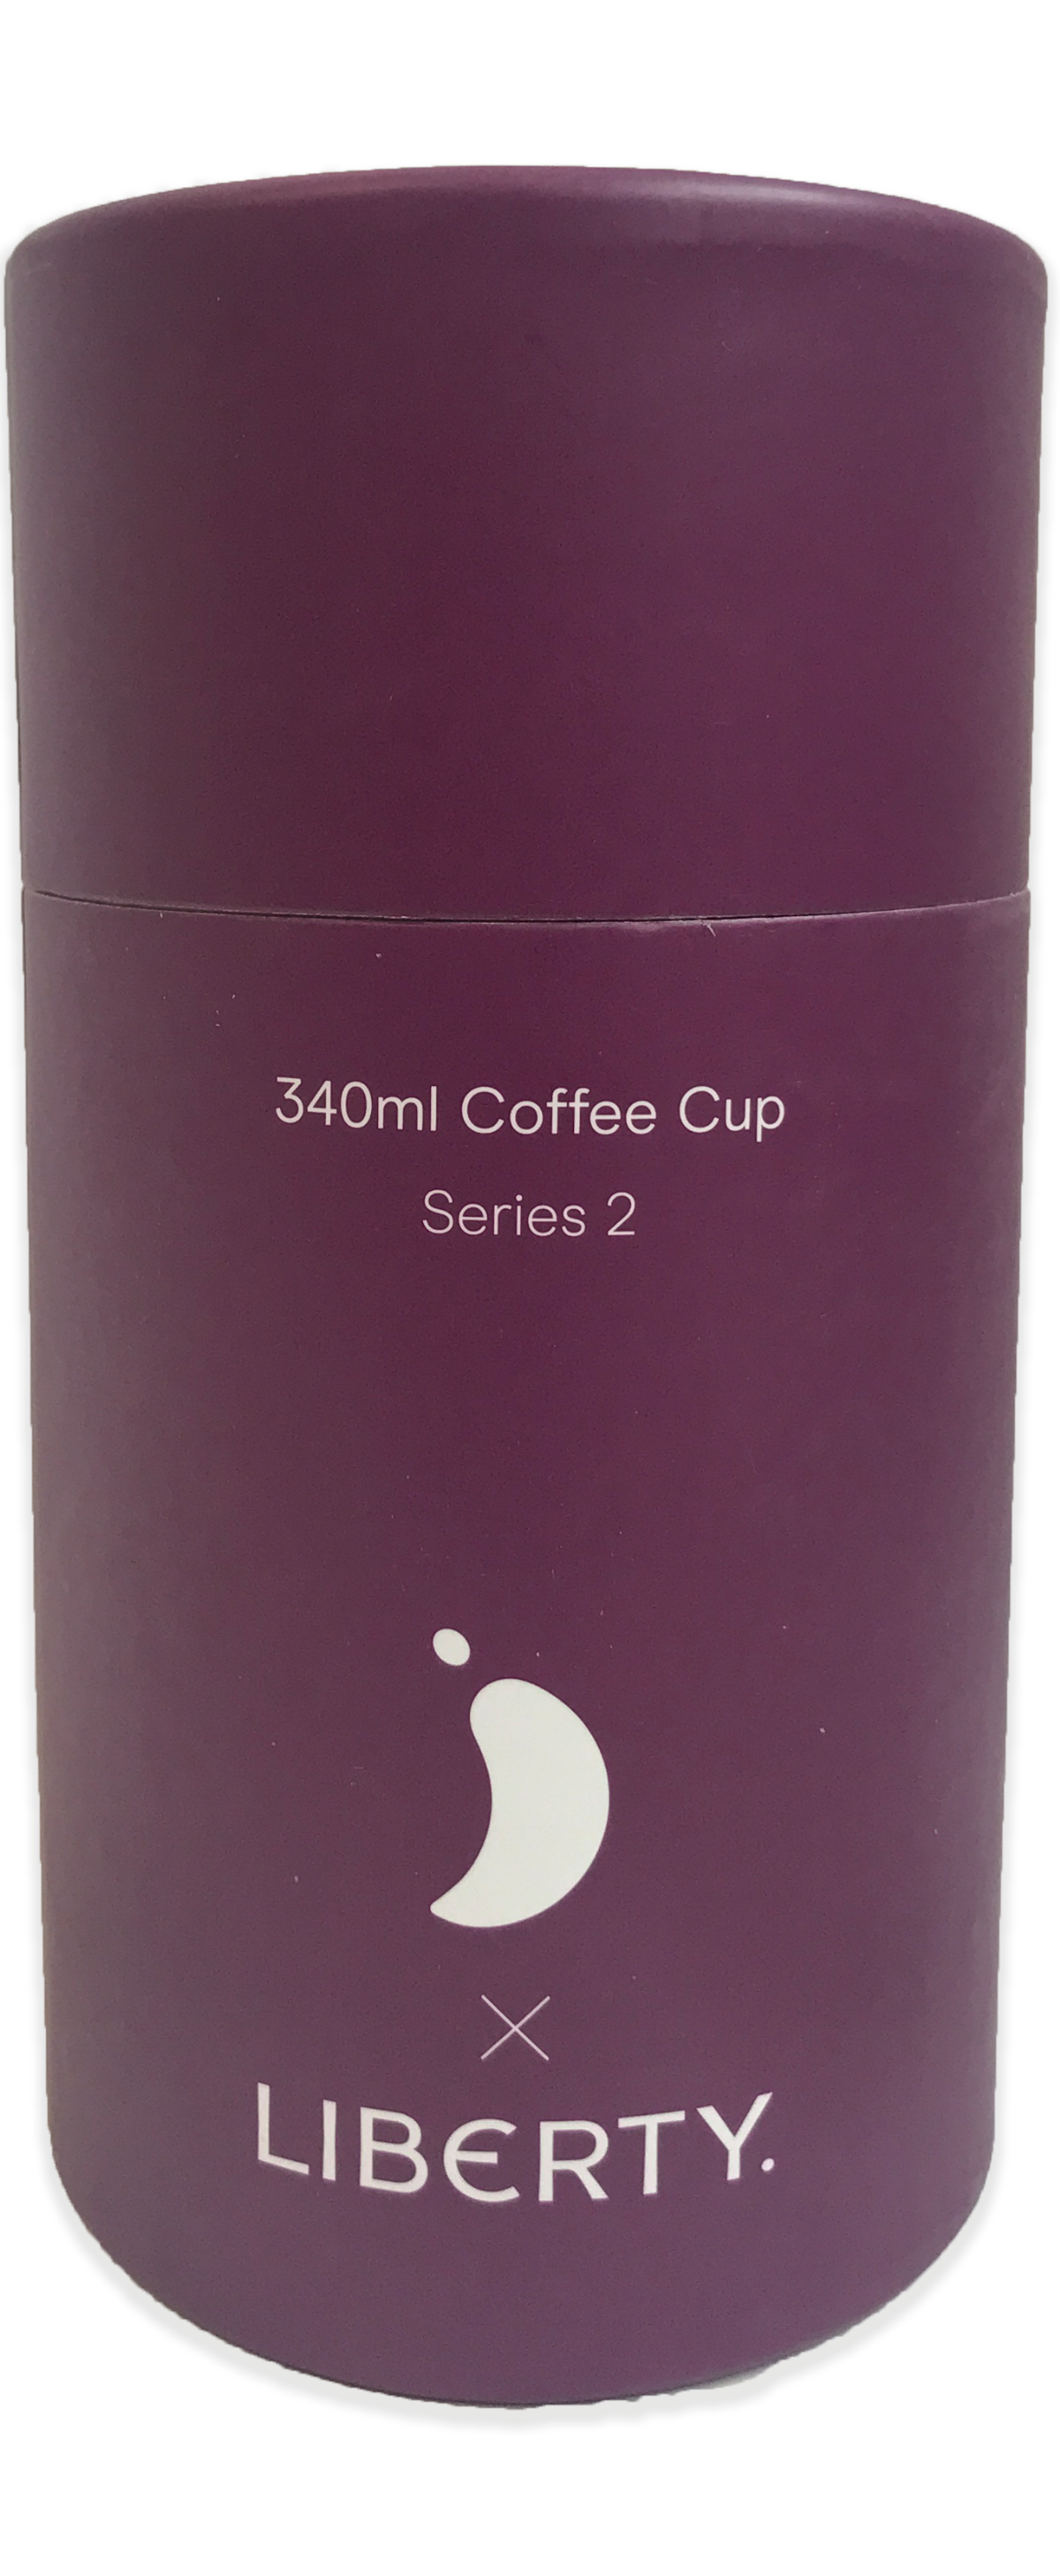 Chillys_S2_Liberty_cup_Packaging.png